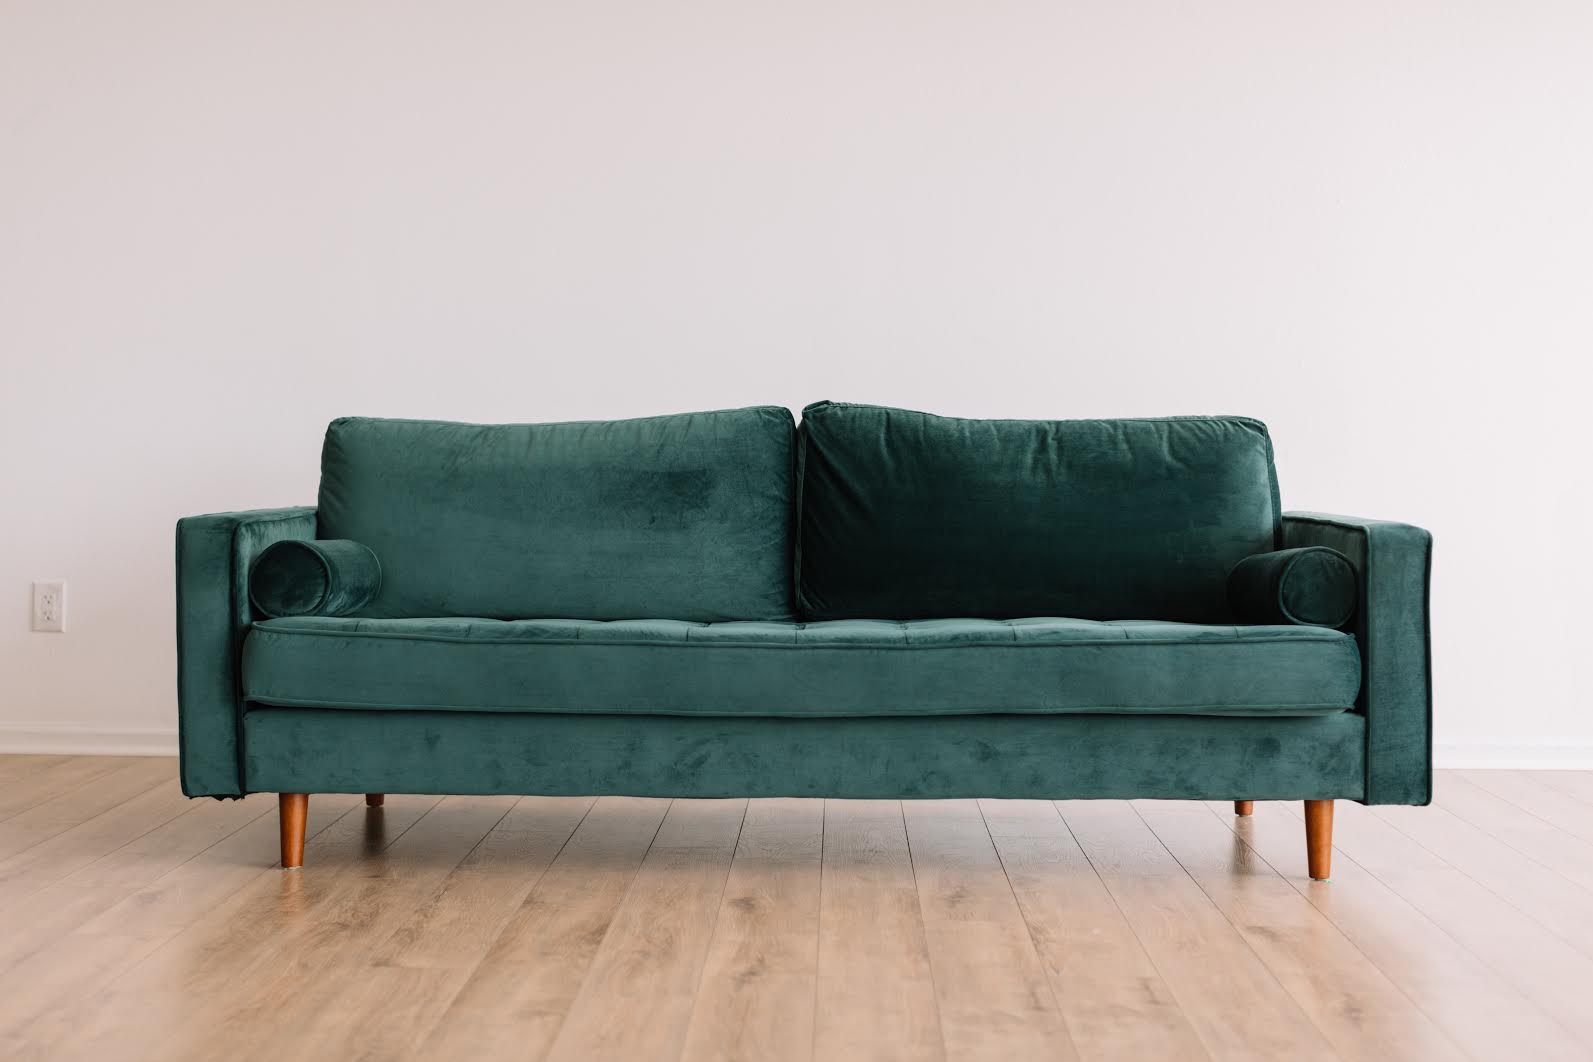 Getting New Furniture? Here's What You Need to Know